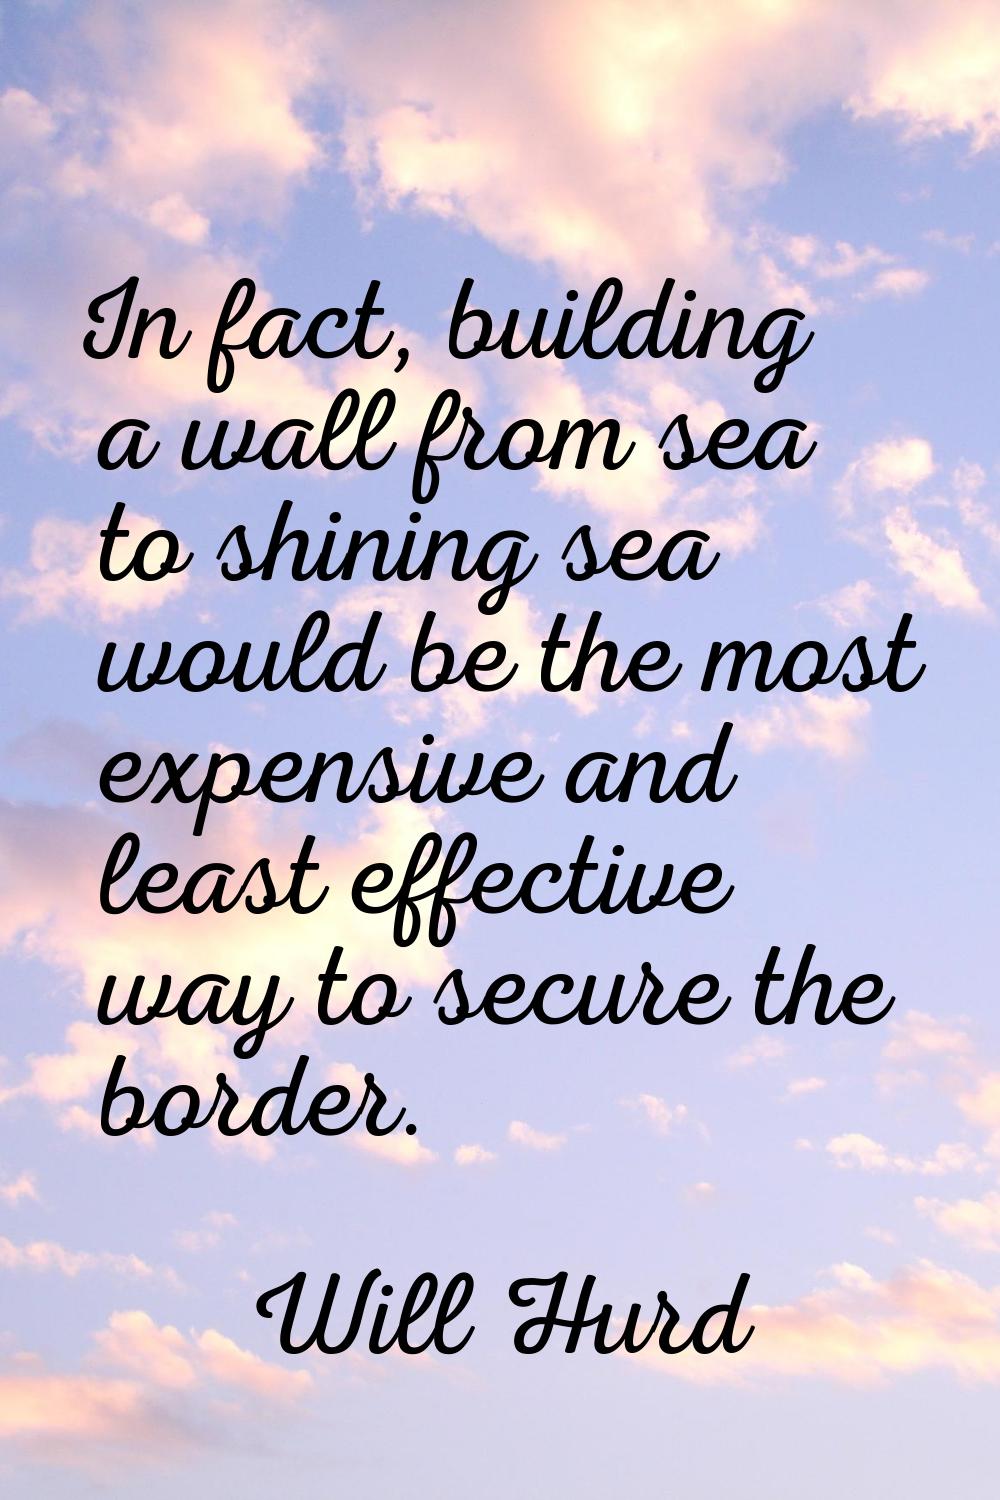 In fact, building a wall from sea to shining sea would be the most expensive and least effective wa